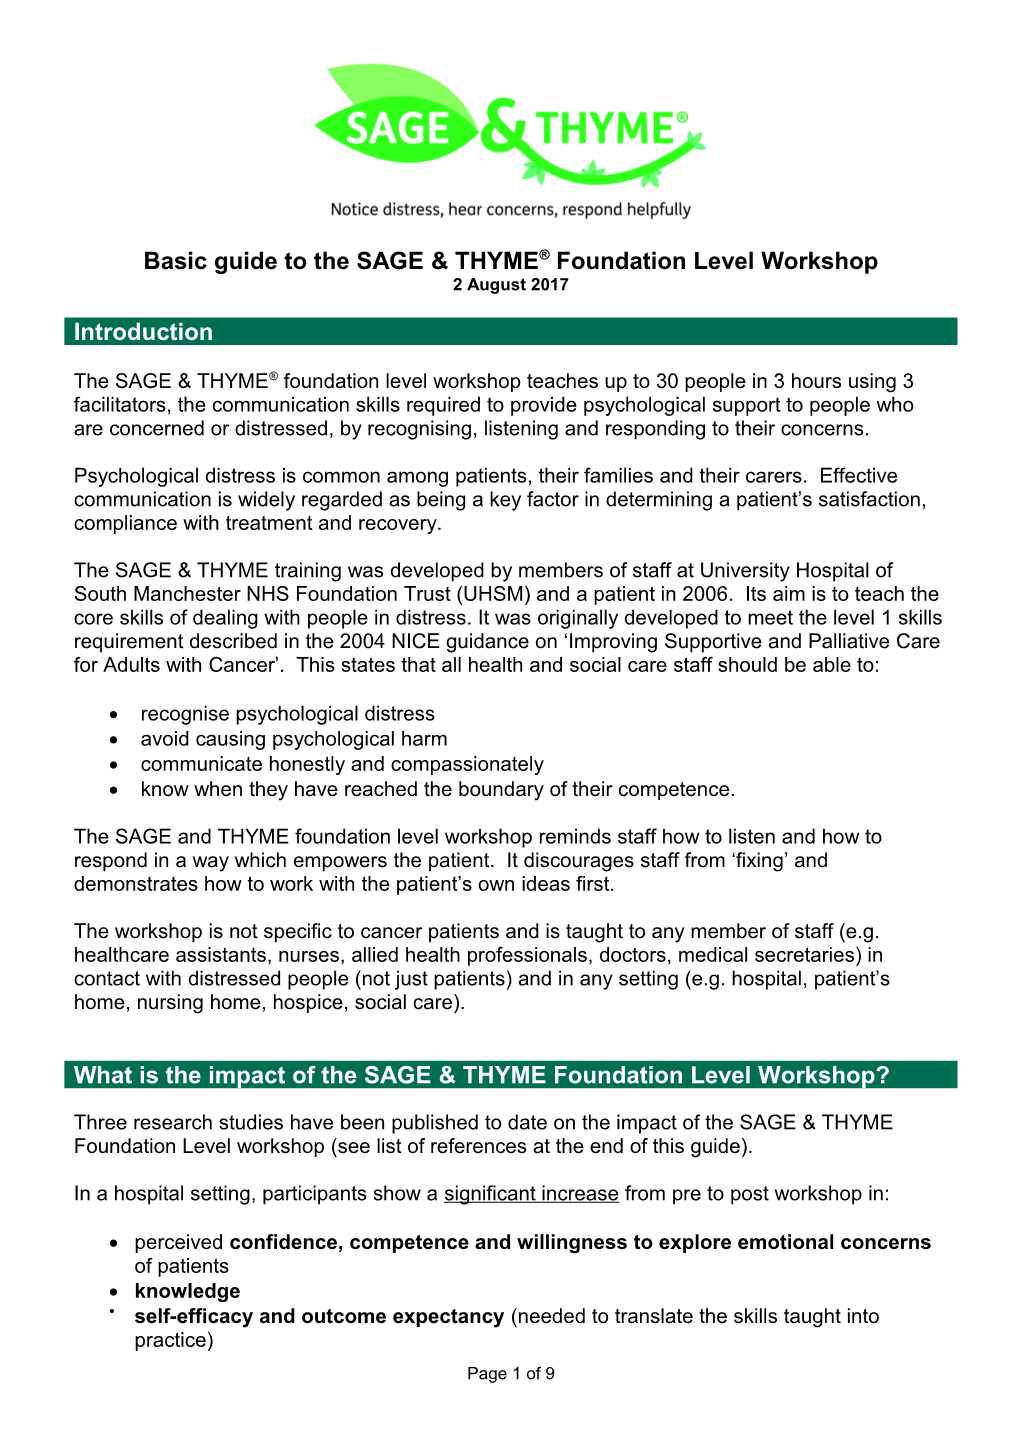 Basic Guide to the SAGE & THYME Foundation Levelworkshop